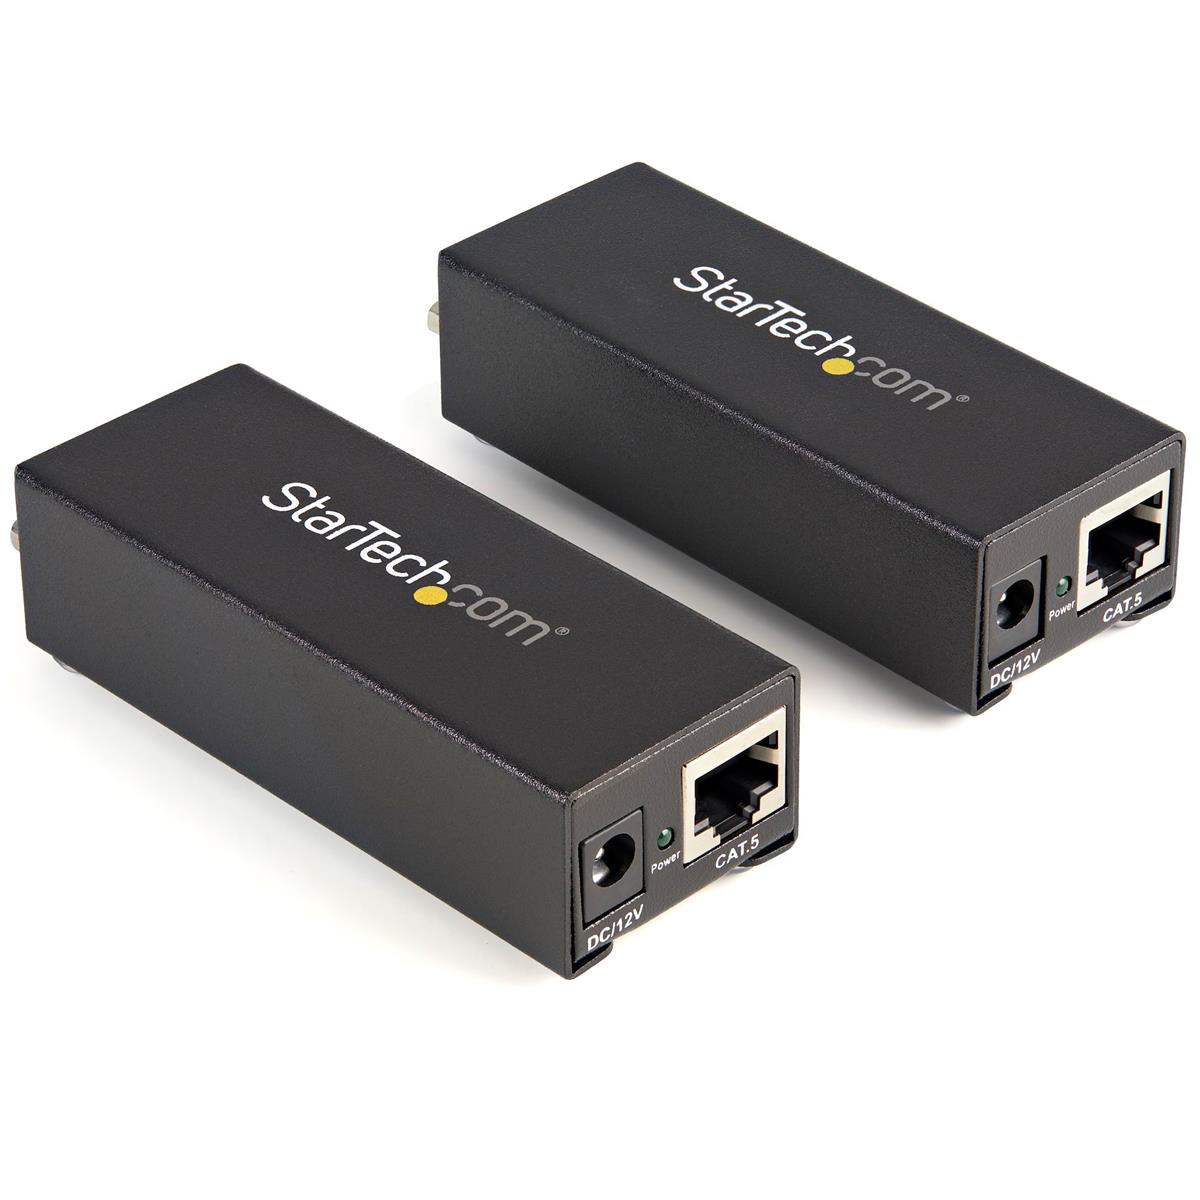 Image of StarTech VGA to Cat 5 Monitor Extender Kit Up to 250'